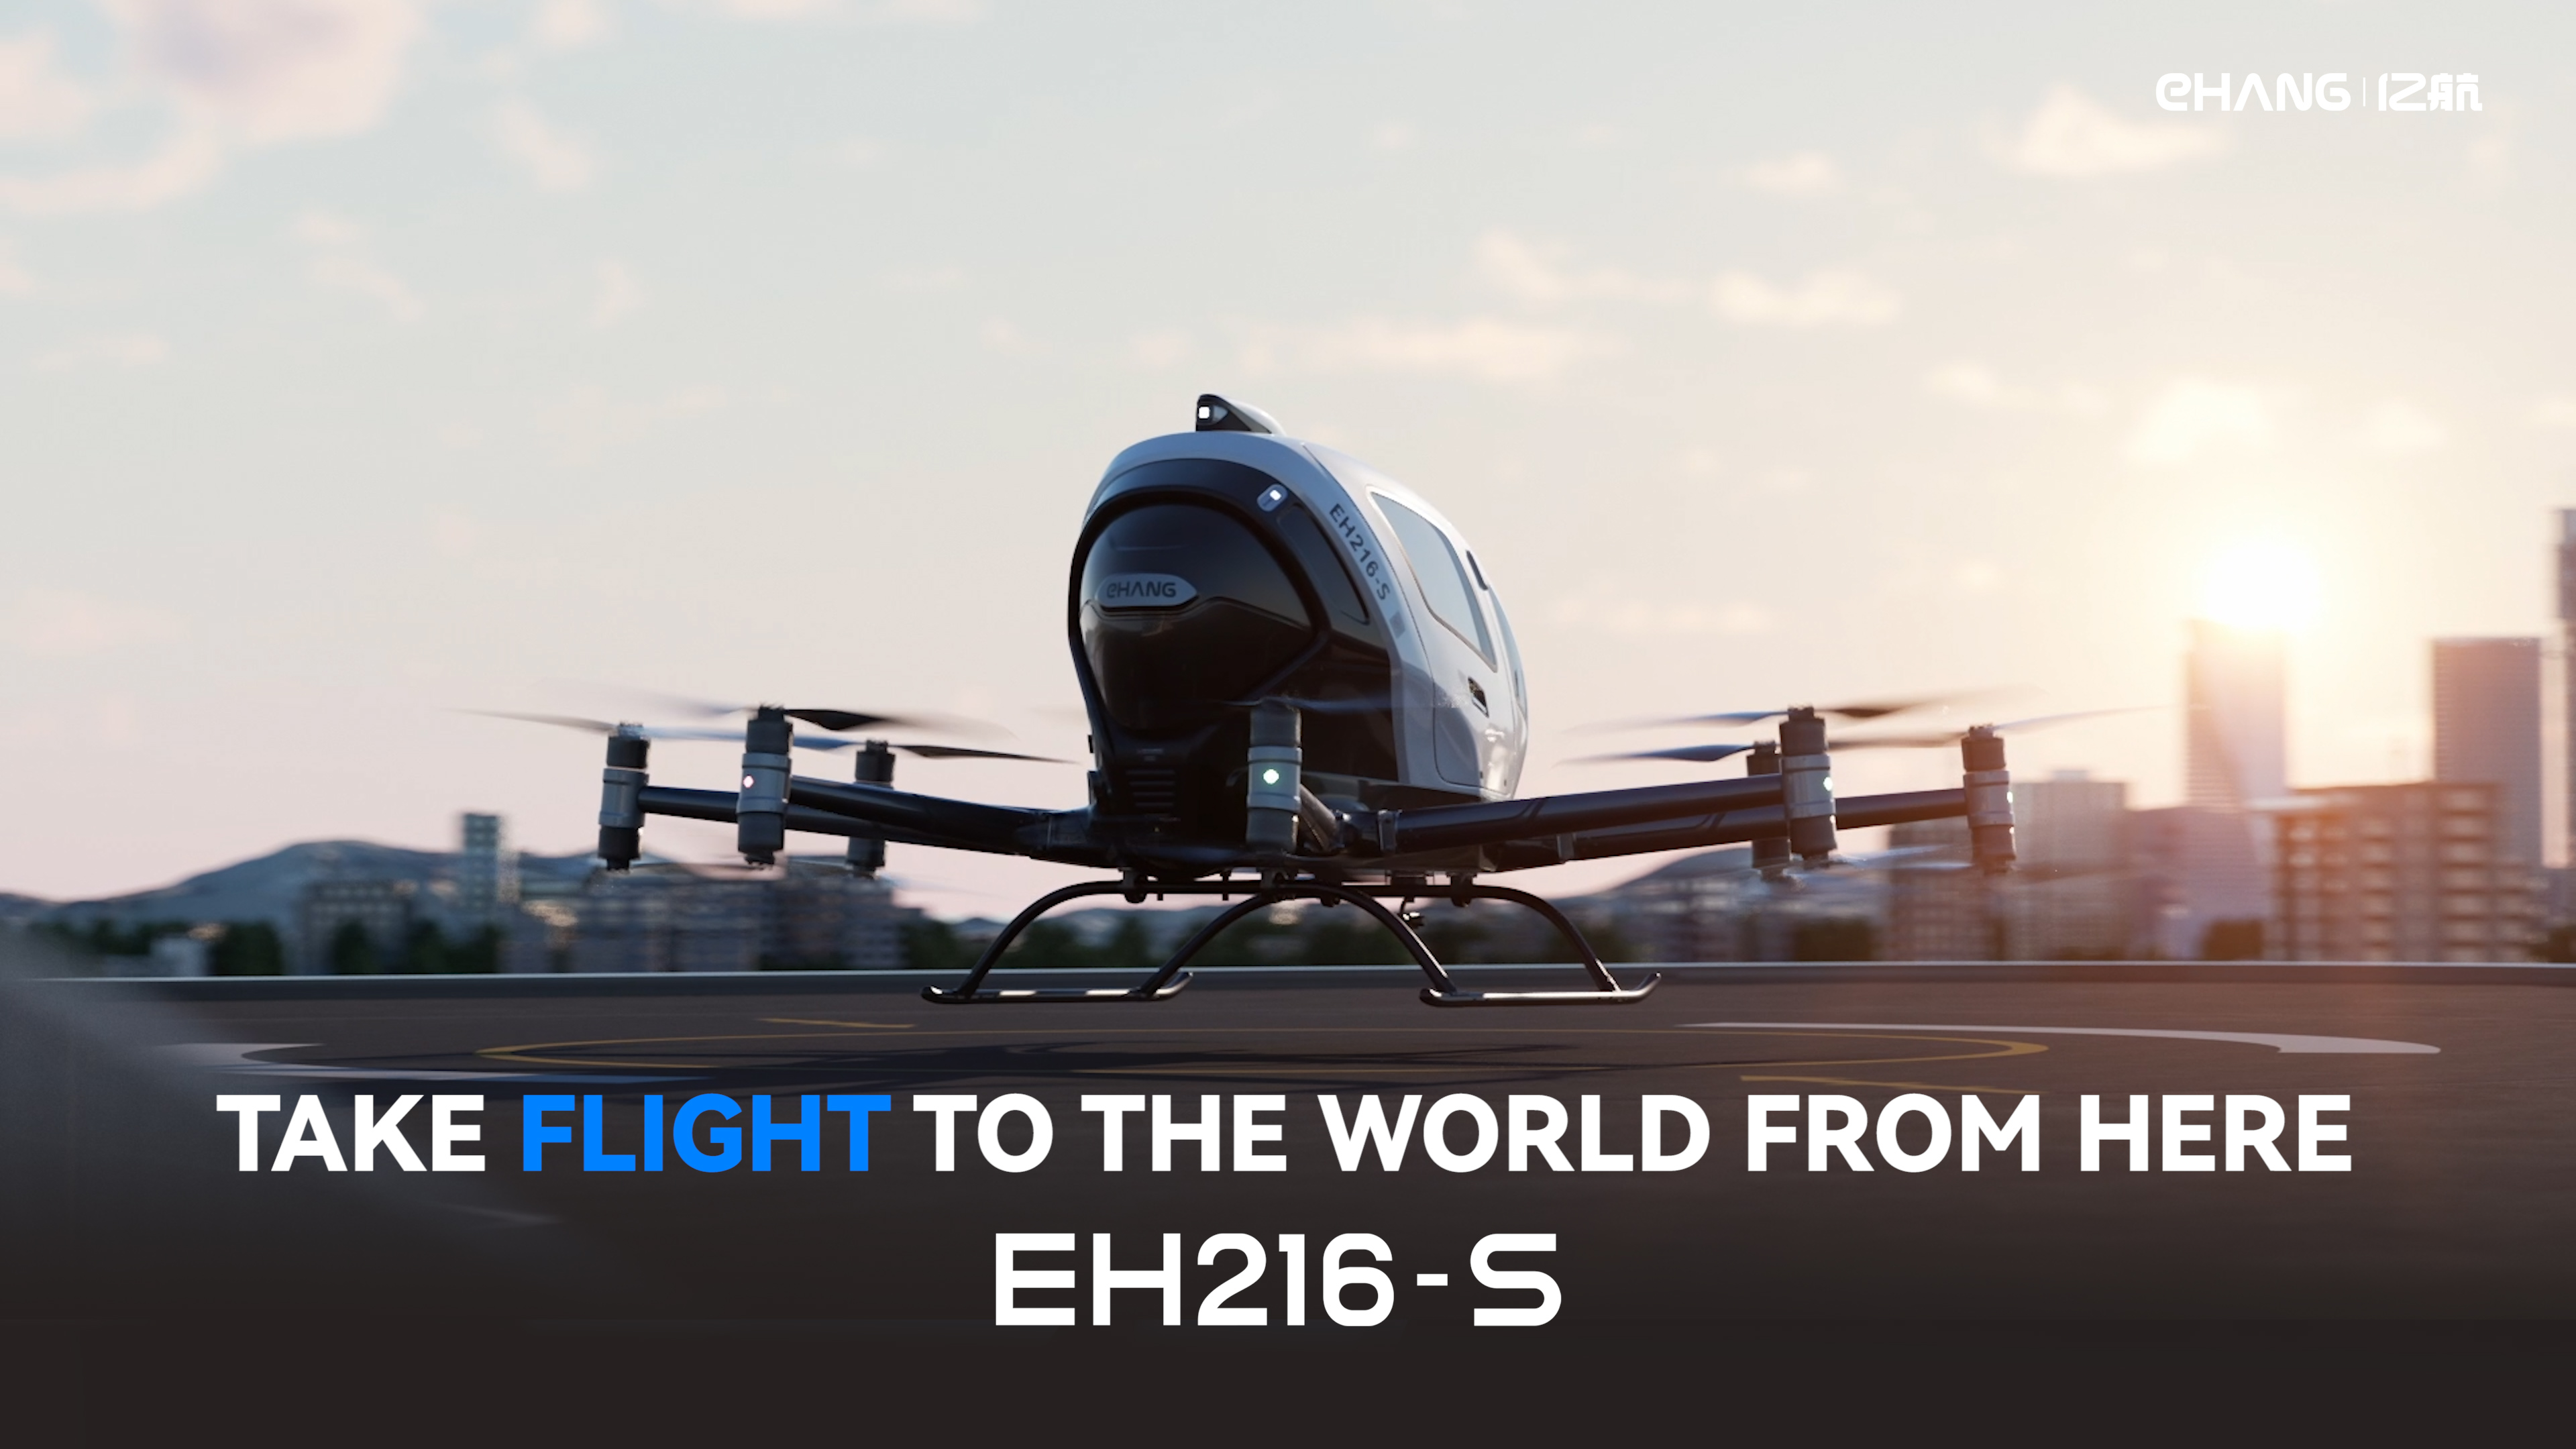 EHang Announces Suggested Retail Price of RMB2.39 Million for EH216-S Passenger-Carrying UAV System in China